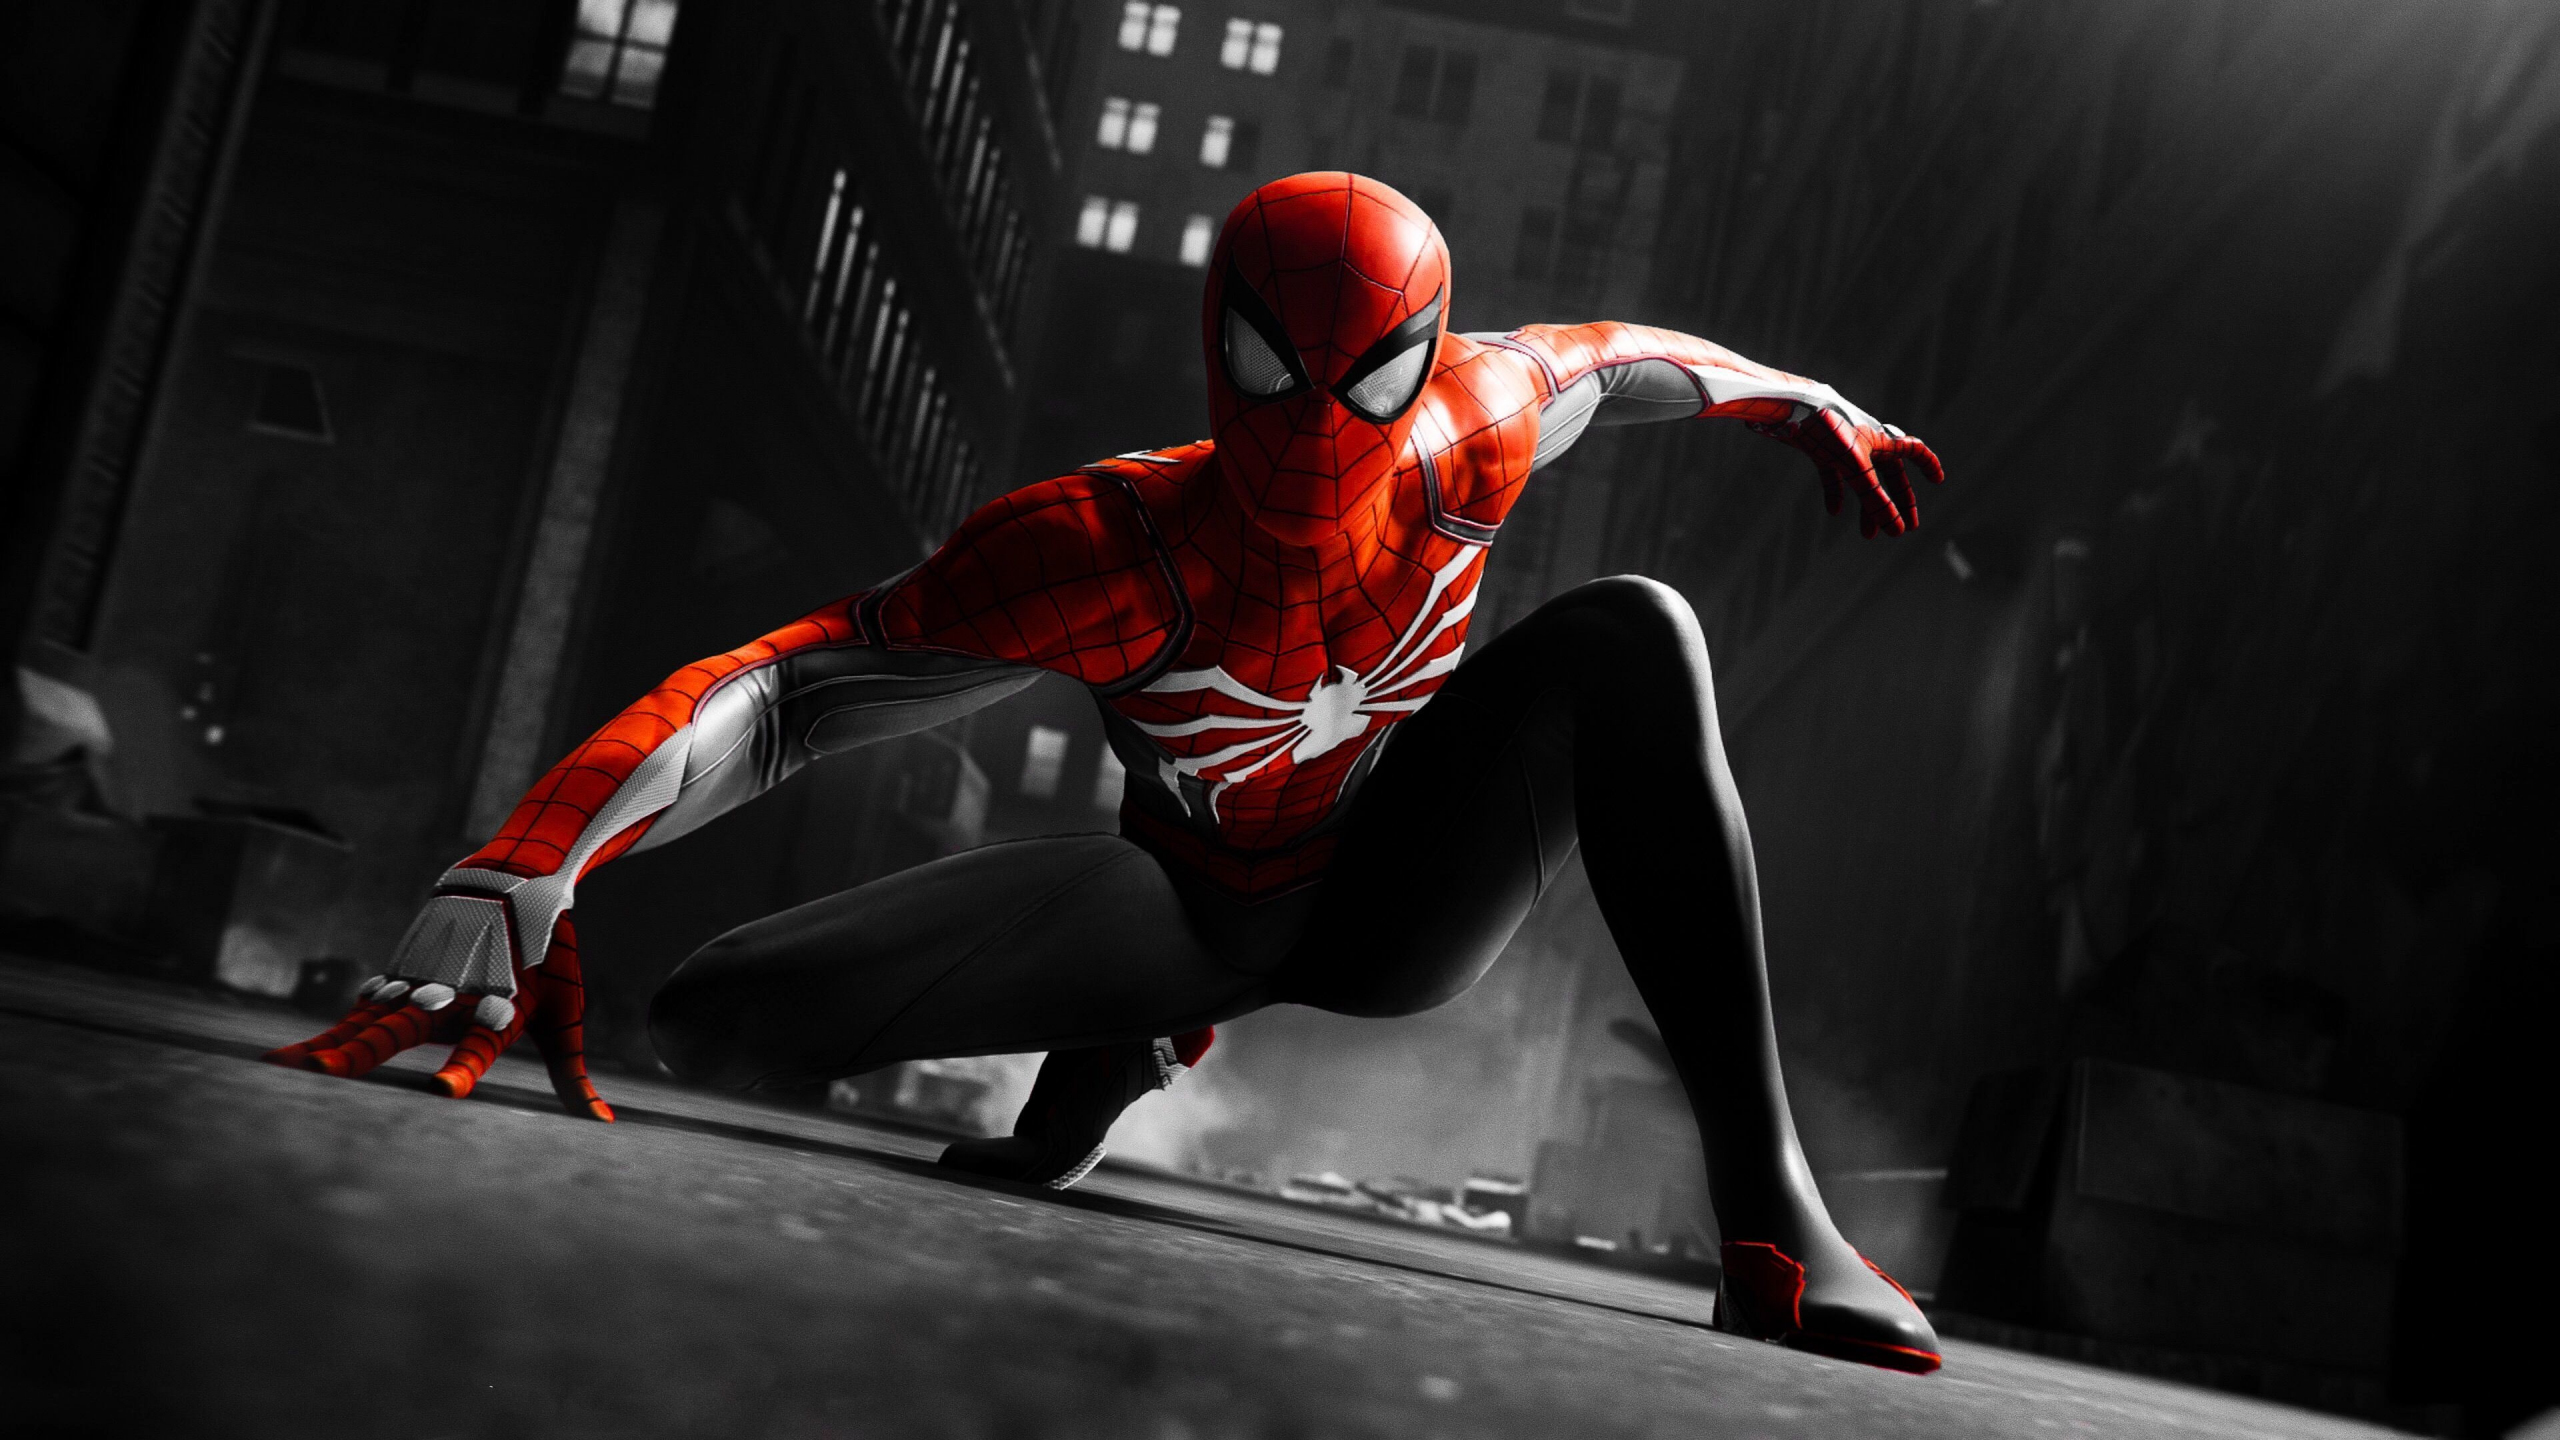 Download Black And Red Suit Spider Man Video Game 2560x1440 Wallpaper Dual Wide 16 9 2560x1440 Hd Image Background